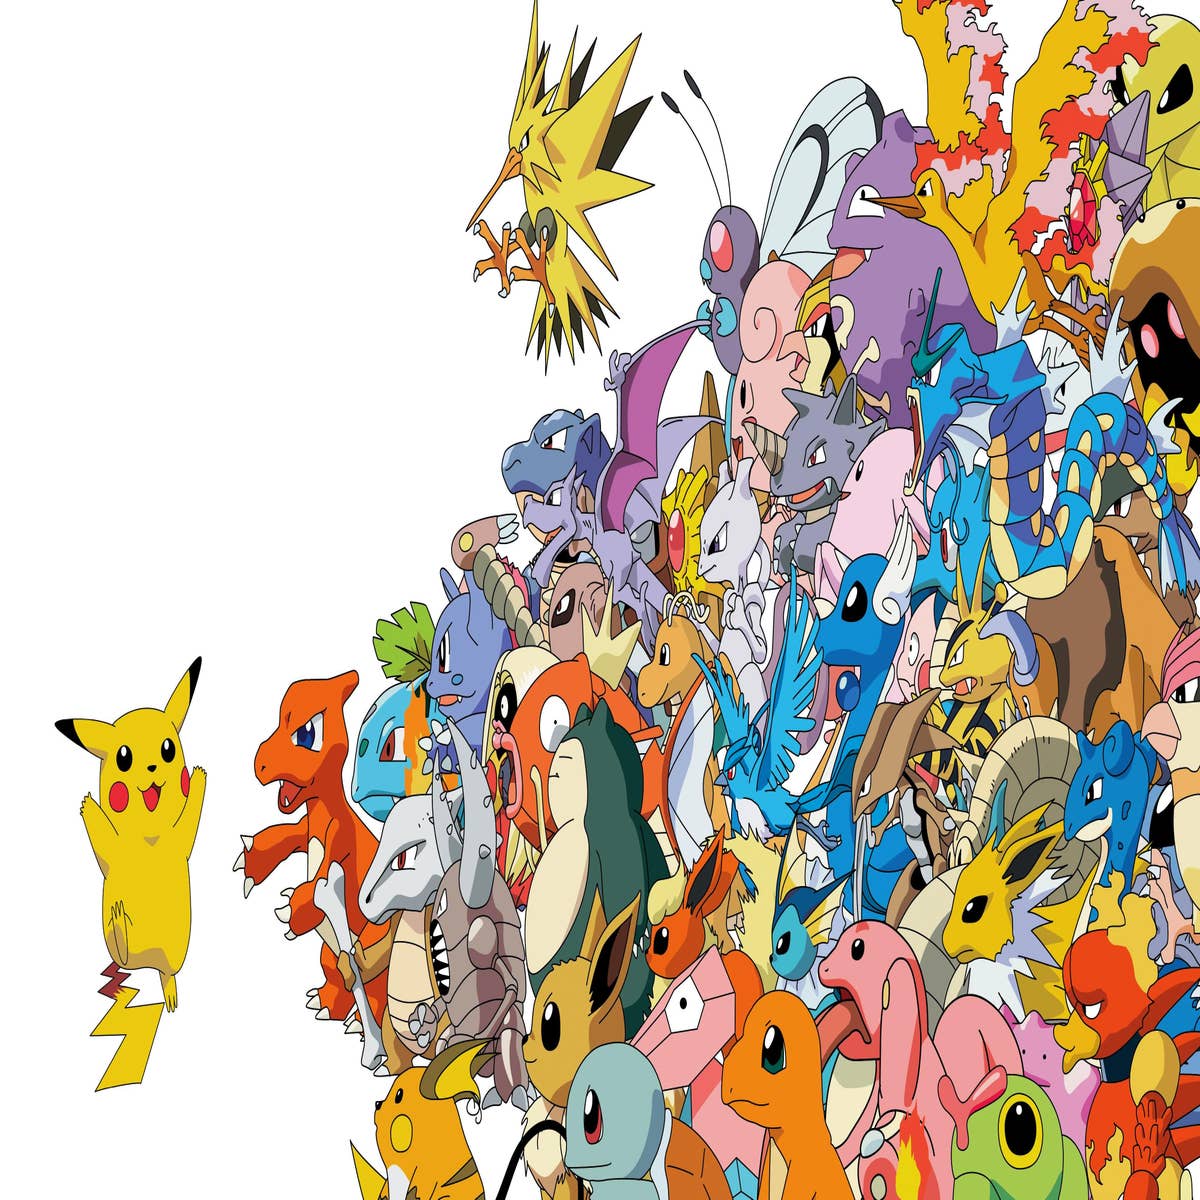 All Pokémon Games In The Correct Order